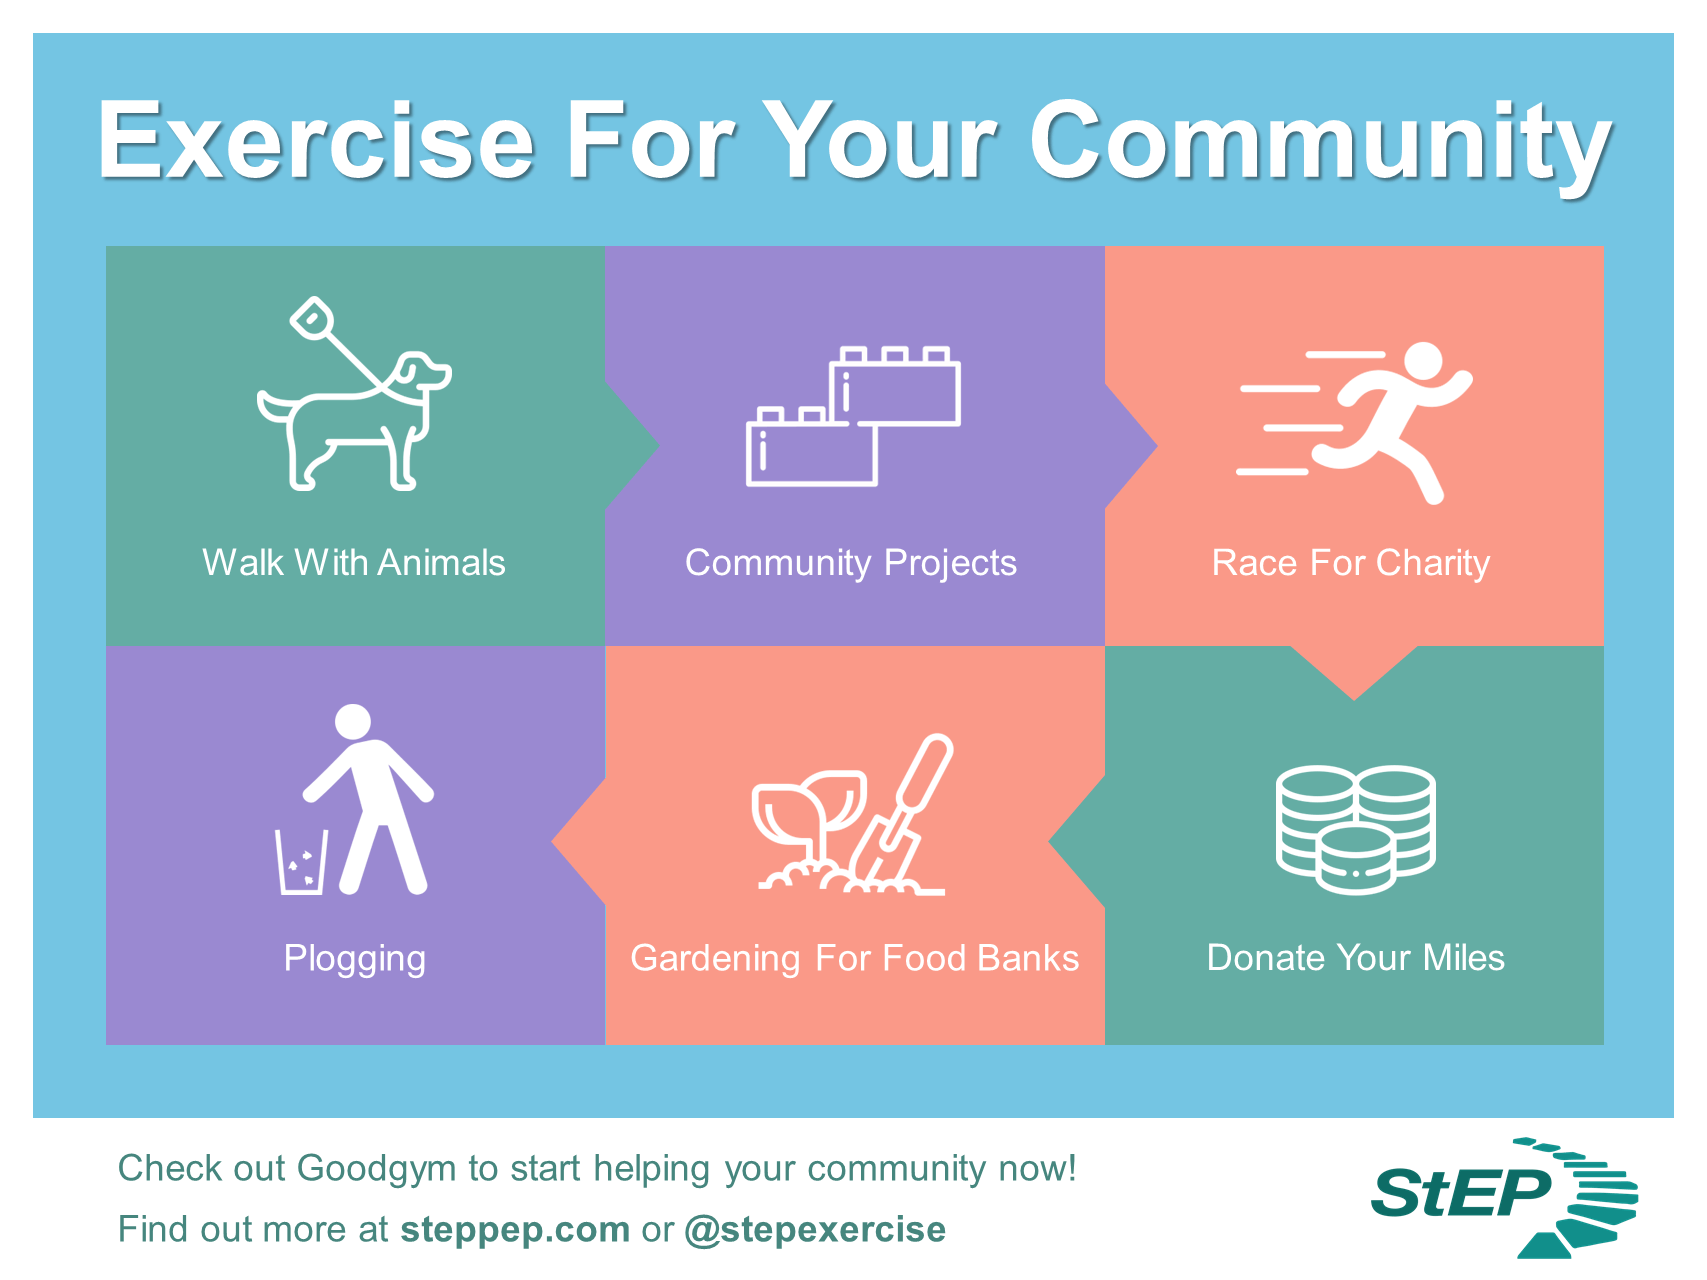 Exercising while helping the community